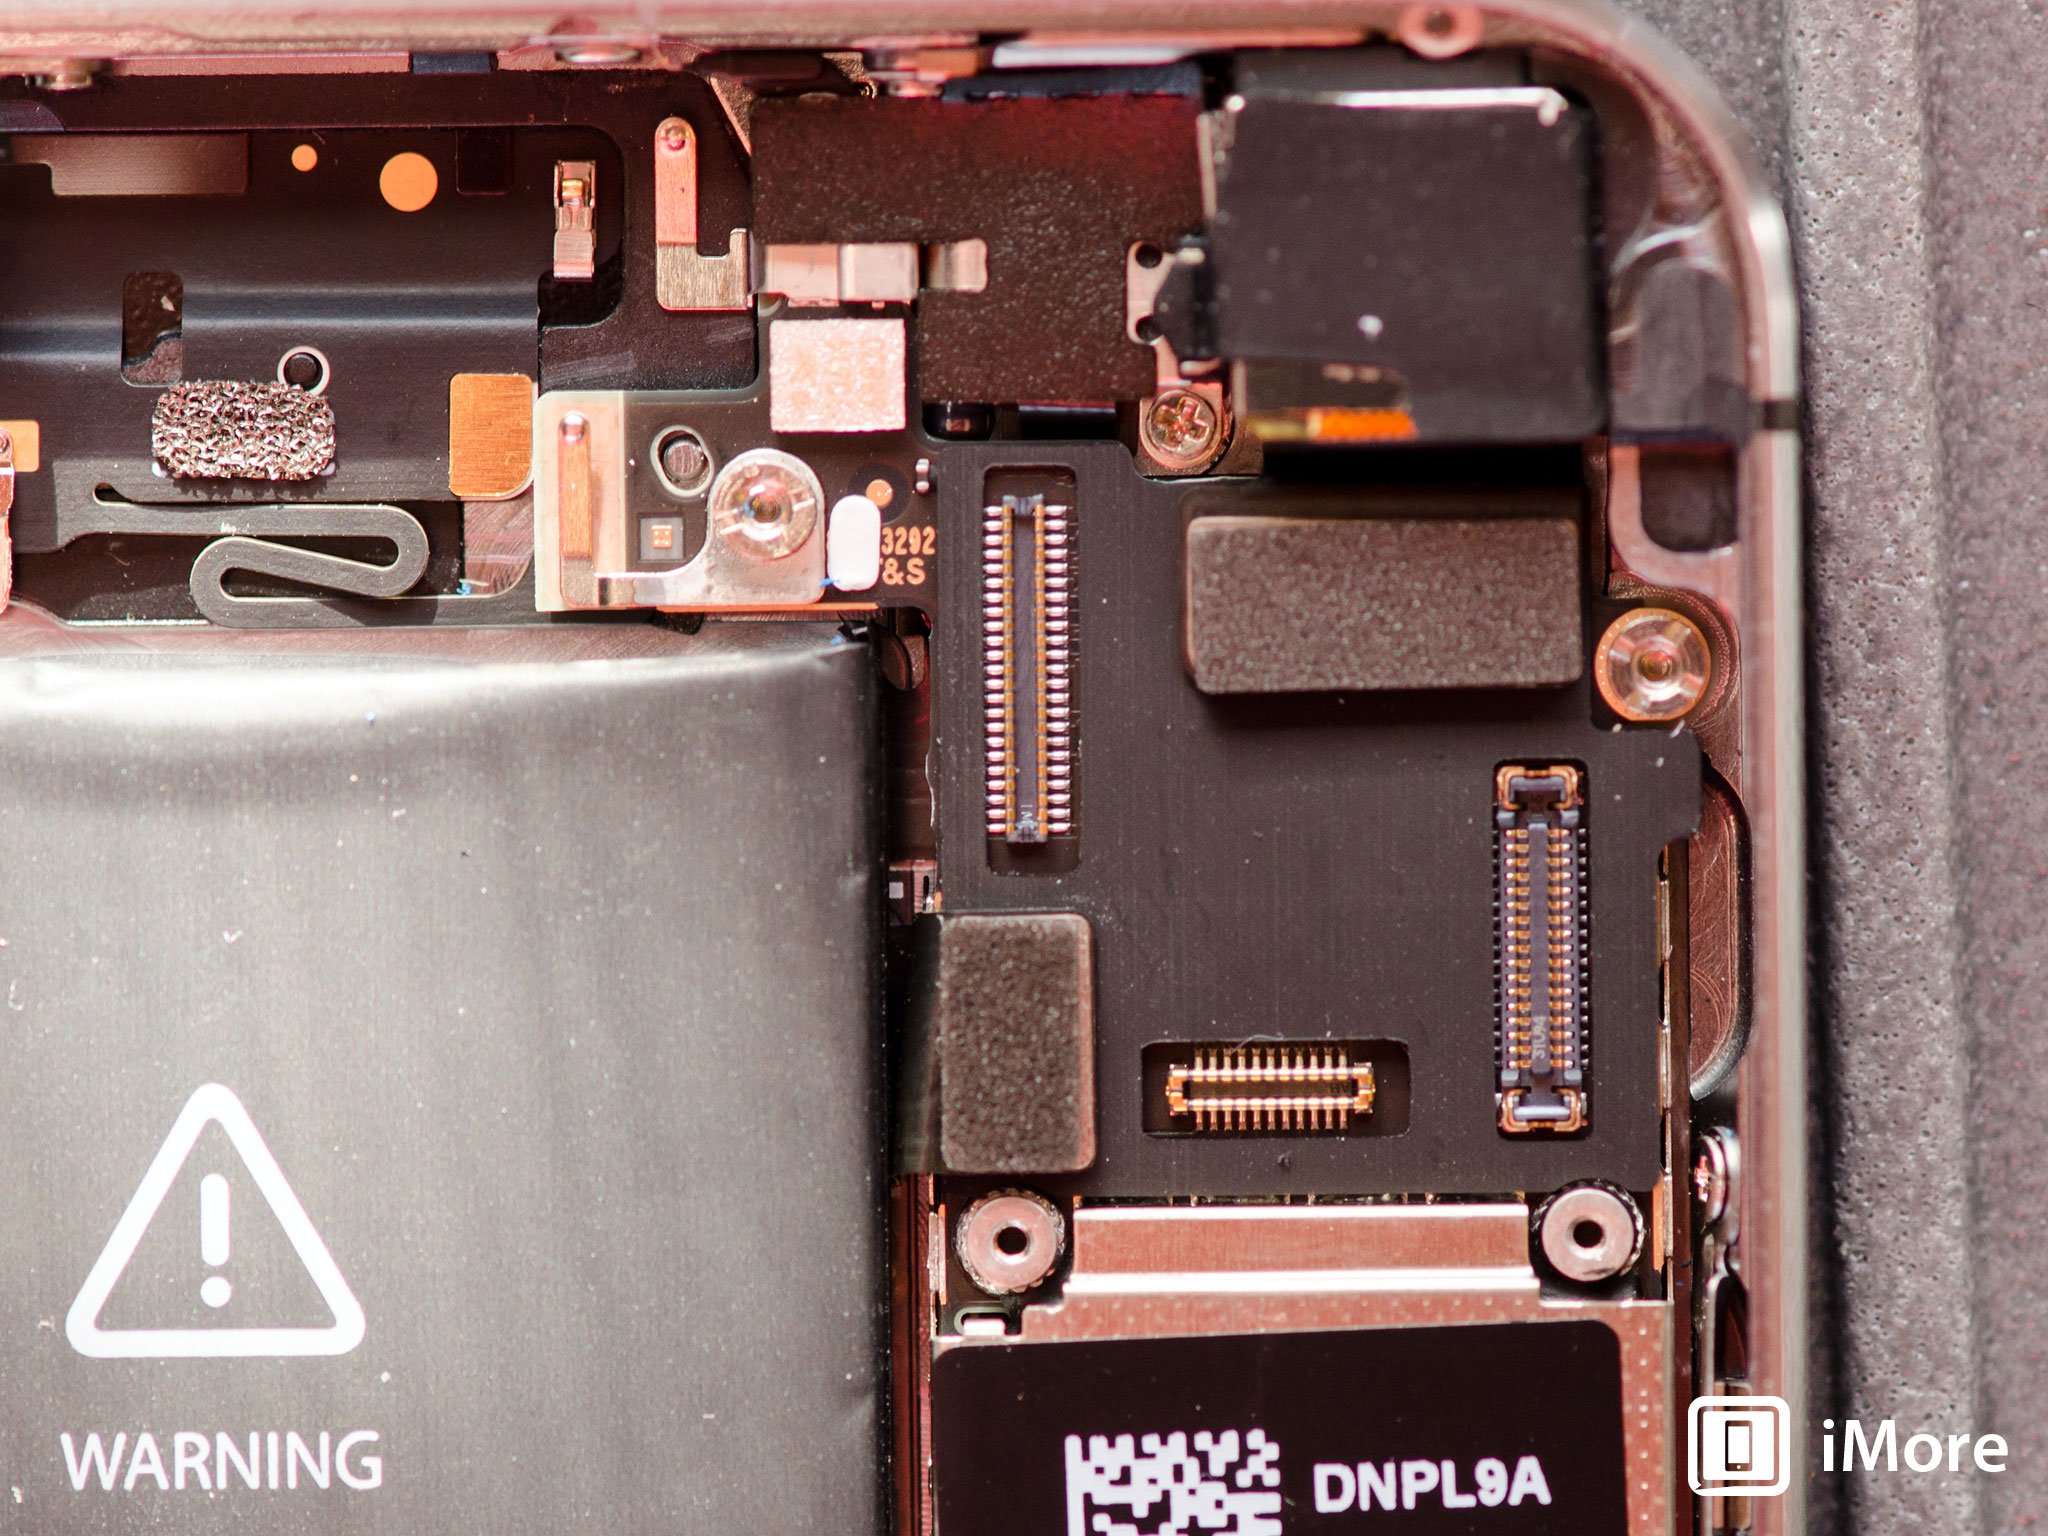 A look at where the digitizer, LCD, and front facing camera assembly cables attach to the iPhone 5s logic board